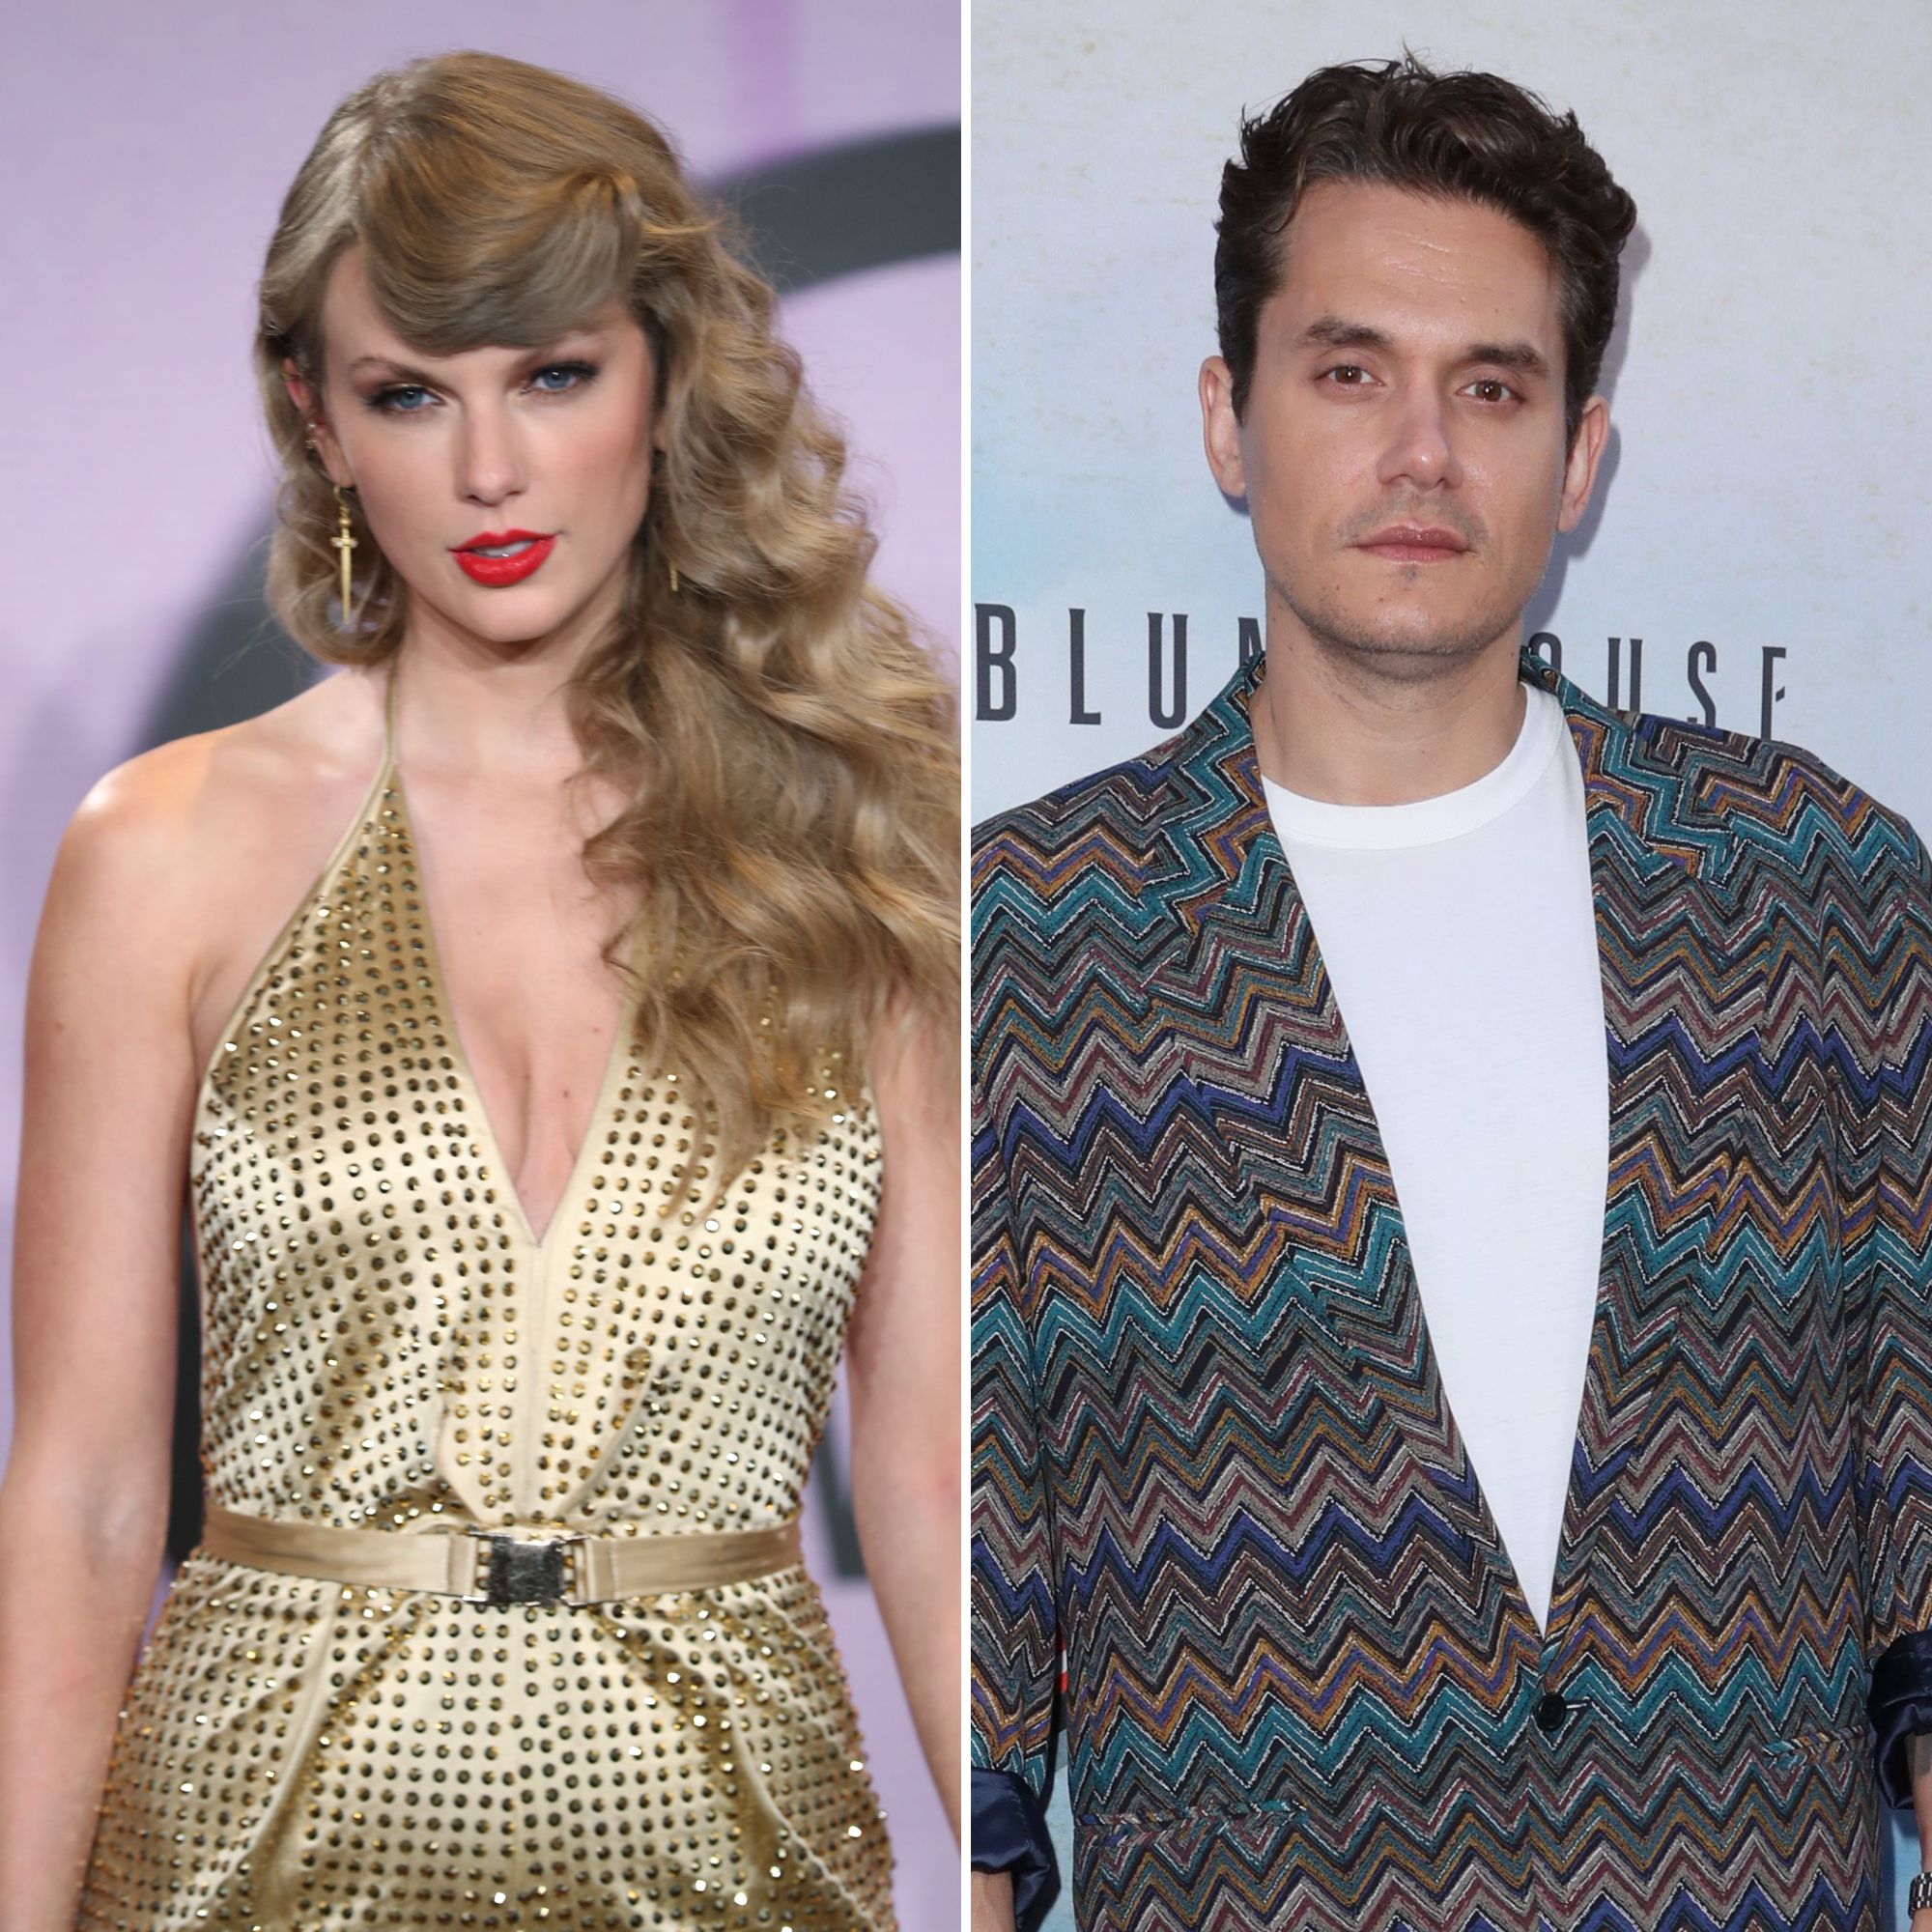 Why Did Taylor Swift and John Mayer Split? Breakup Details photo